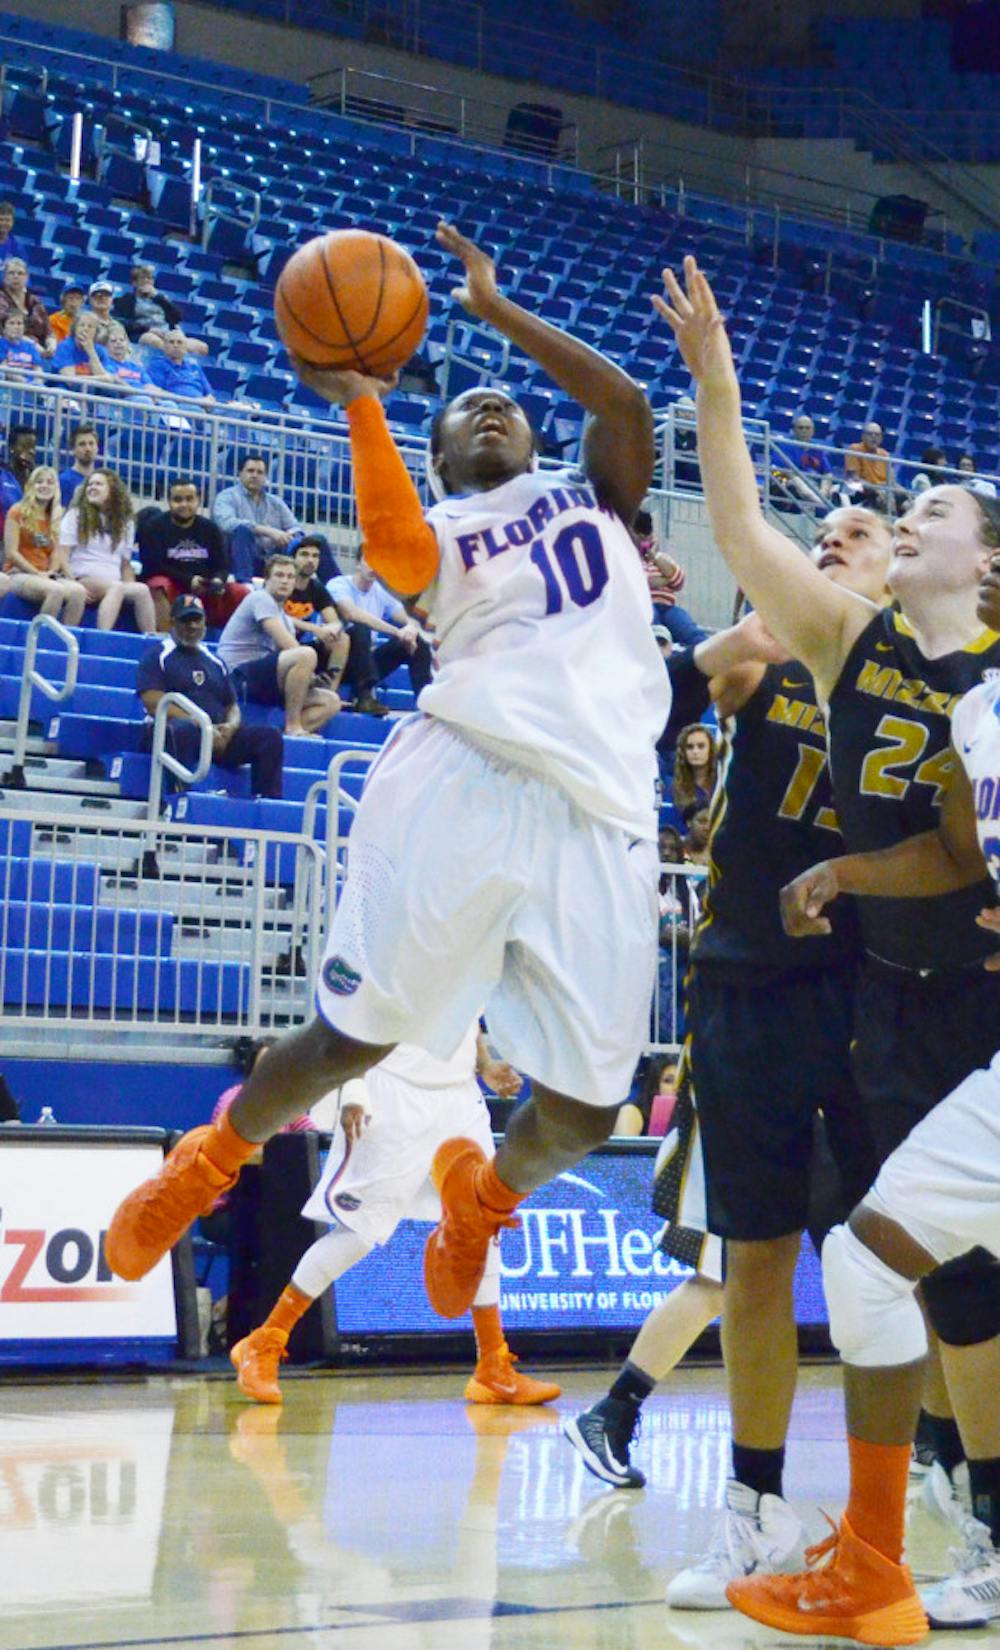 <p>Jaterra Bonds attempts a shot during Florida’s 81-76 loss against Missouri on Thursday in the O’Connell Center.</p>